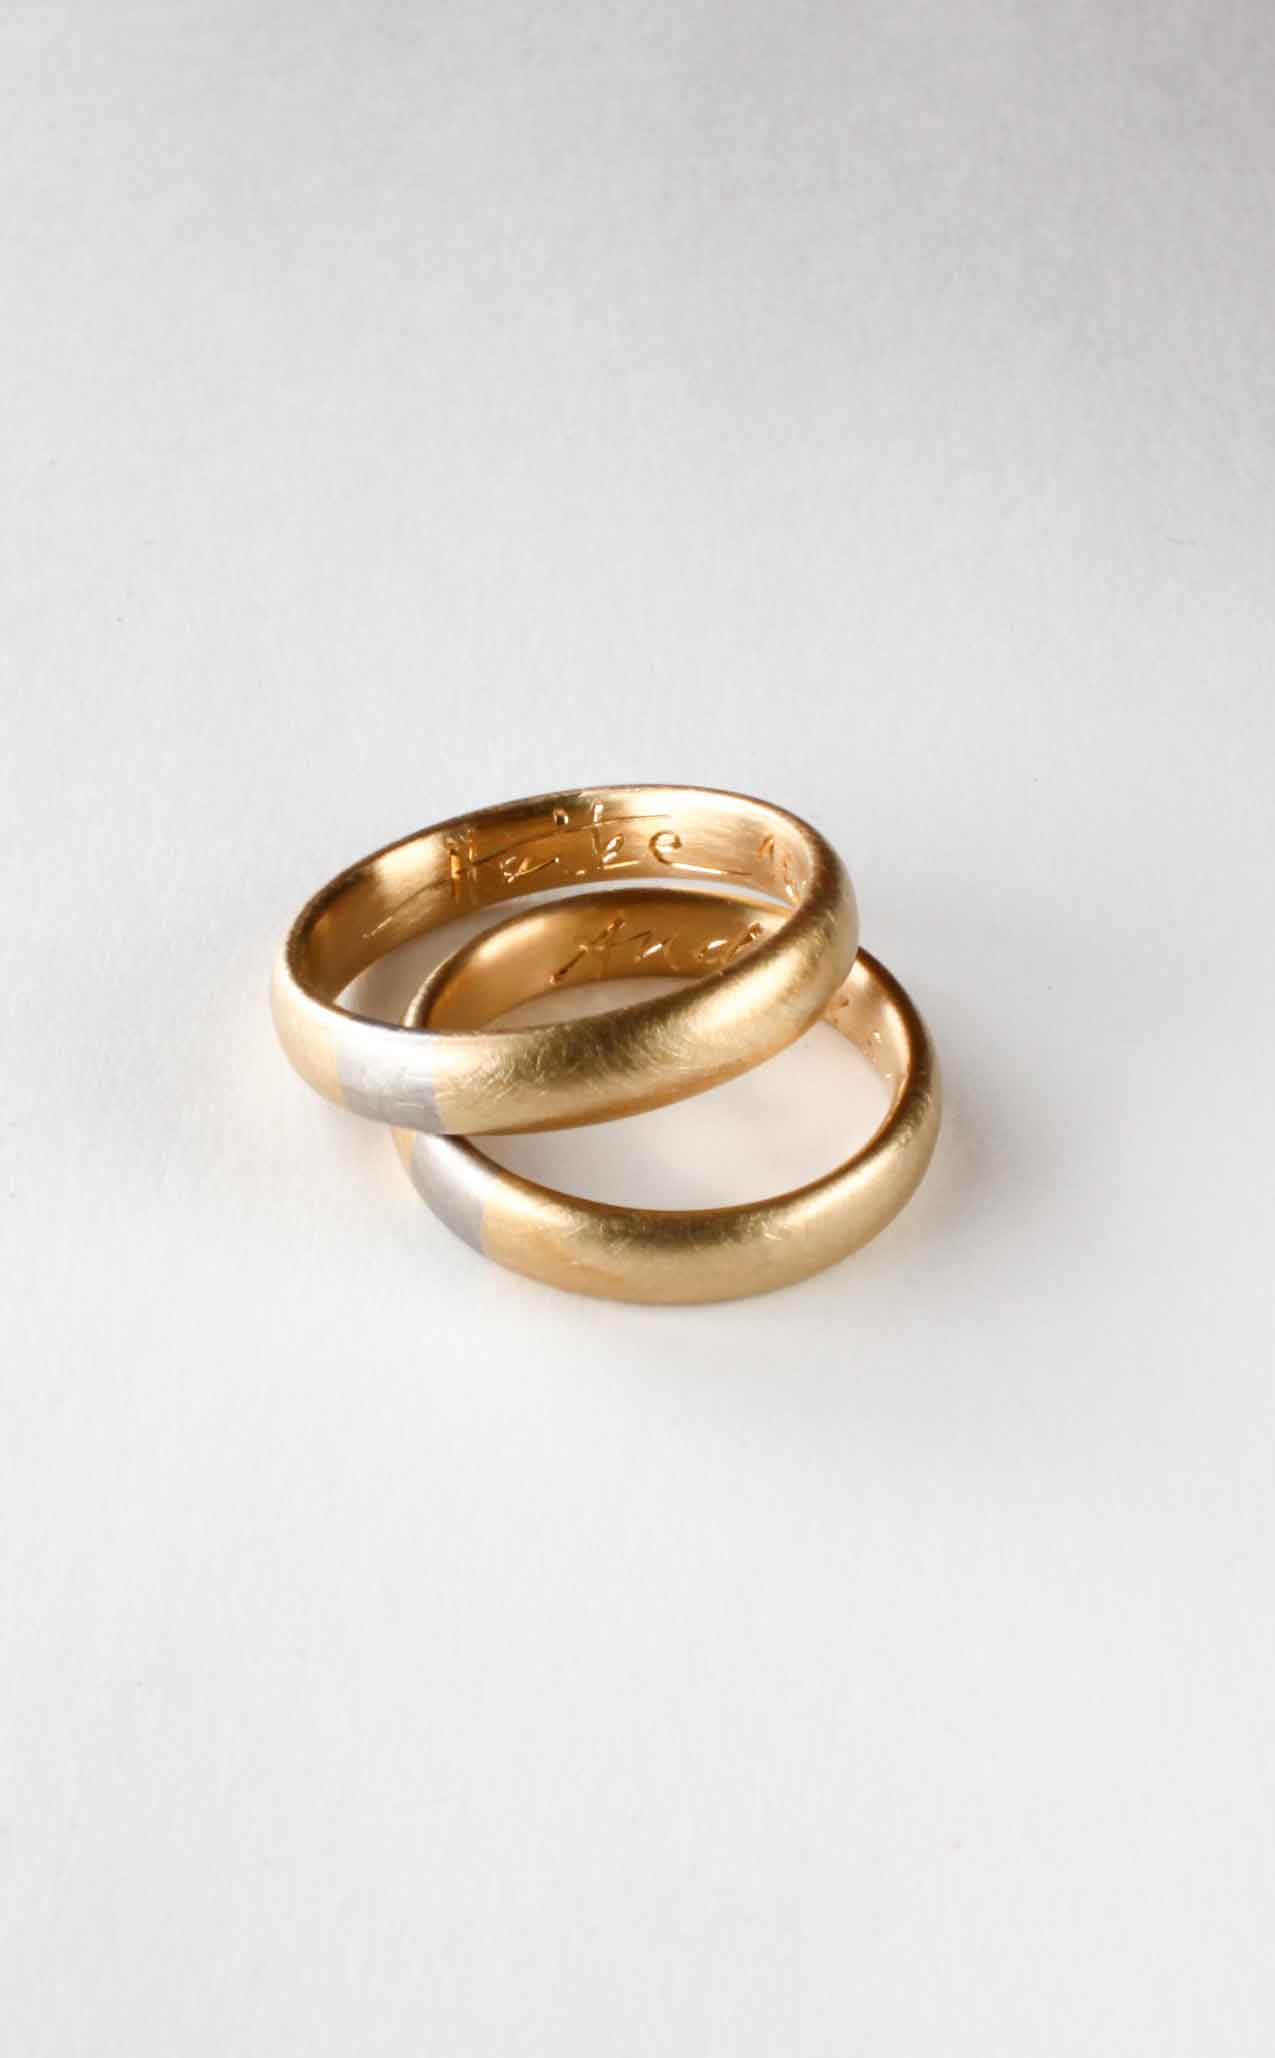 Weddingrings gold ethical yellow and white gold.